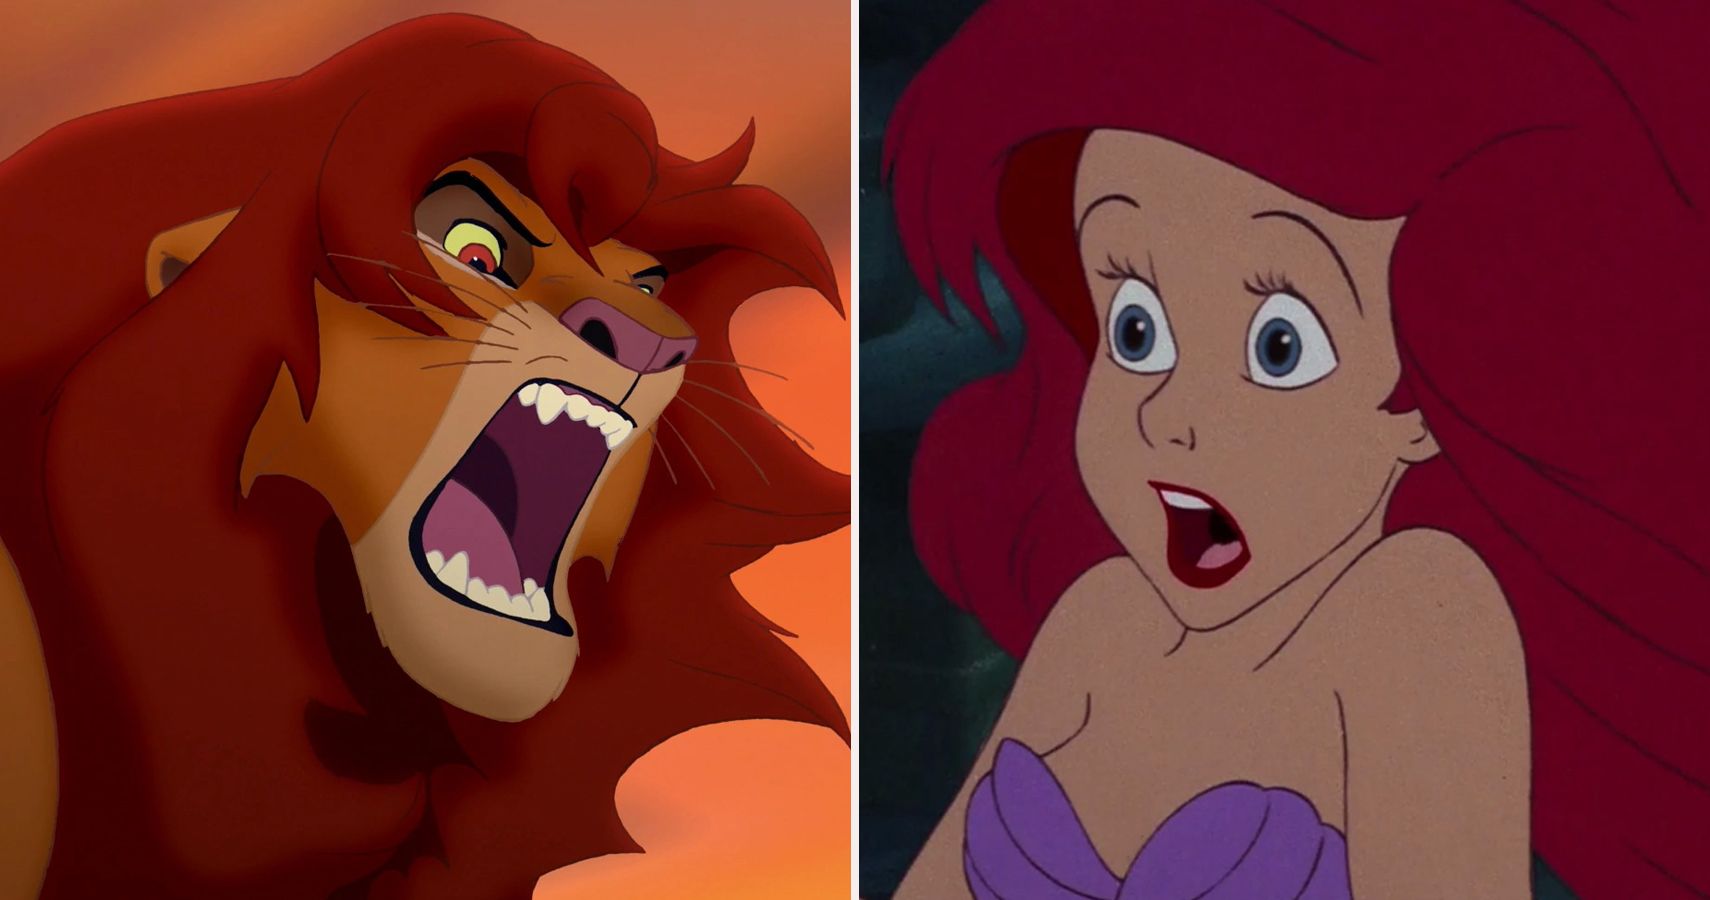 15 Surprising Facts About Disney That They Want To Bury